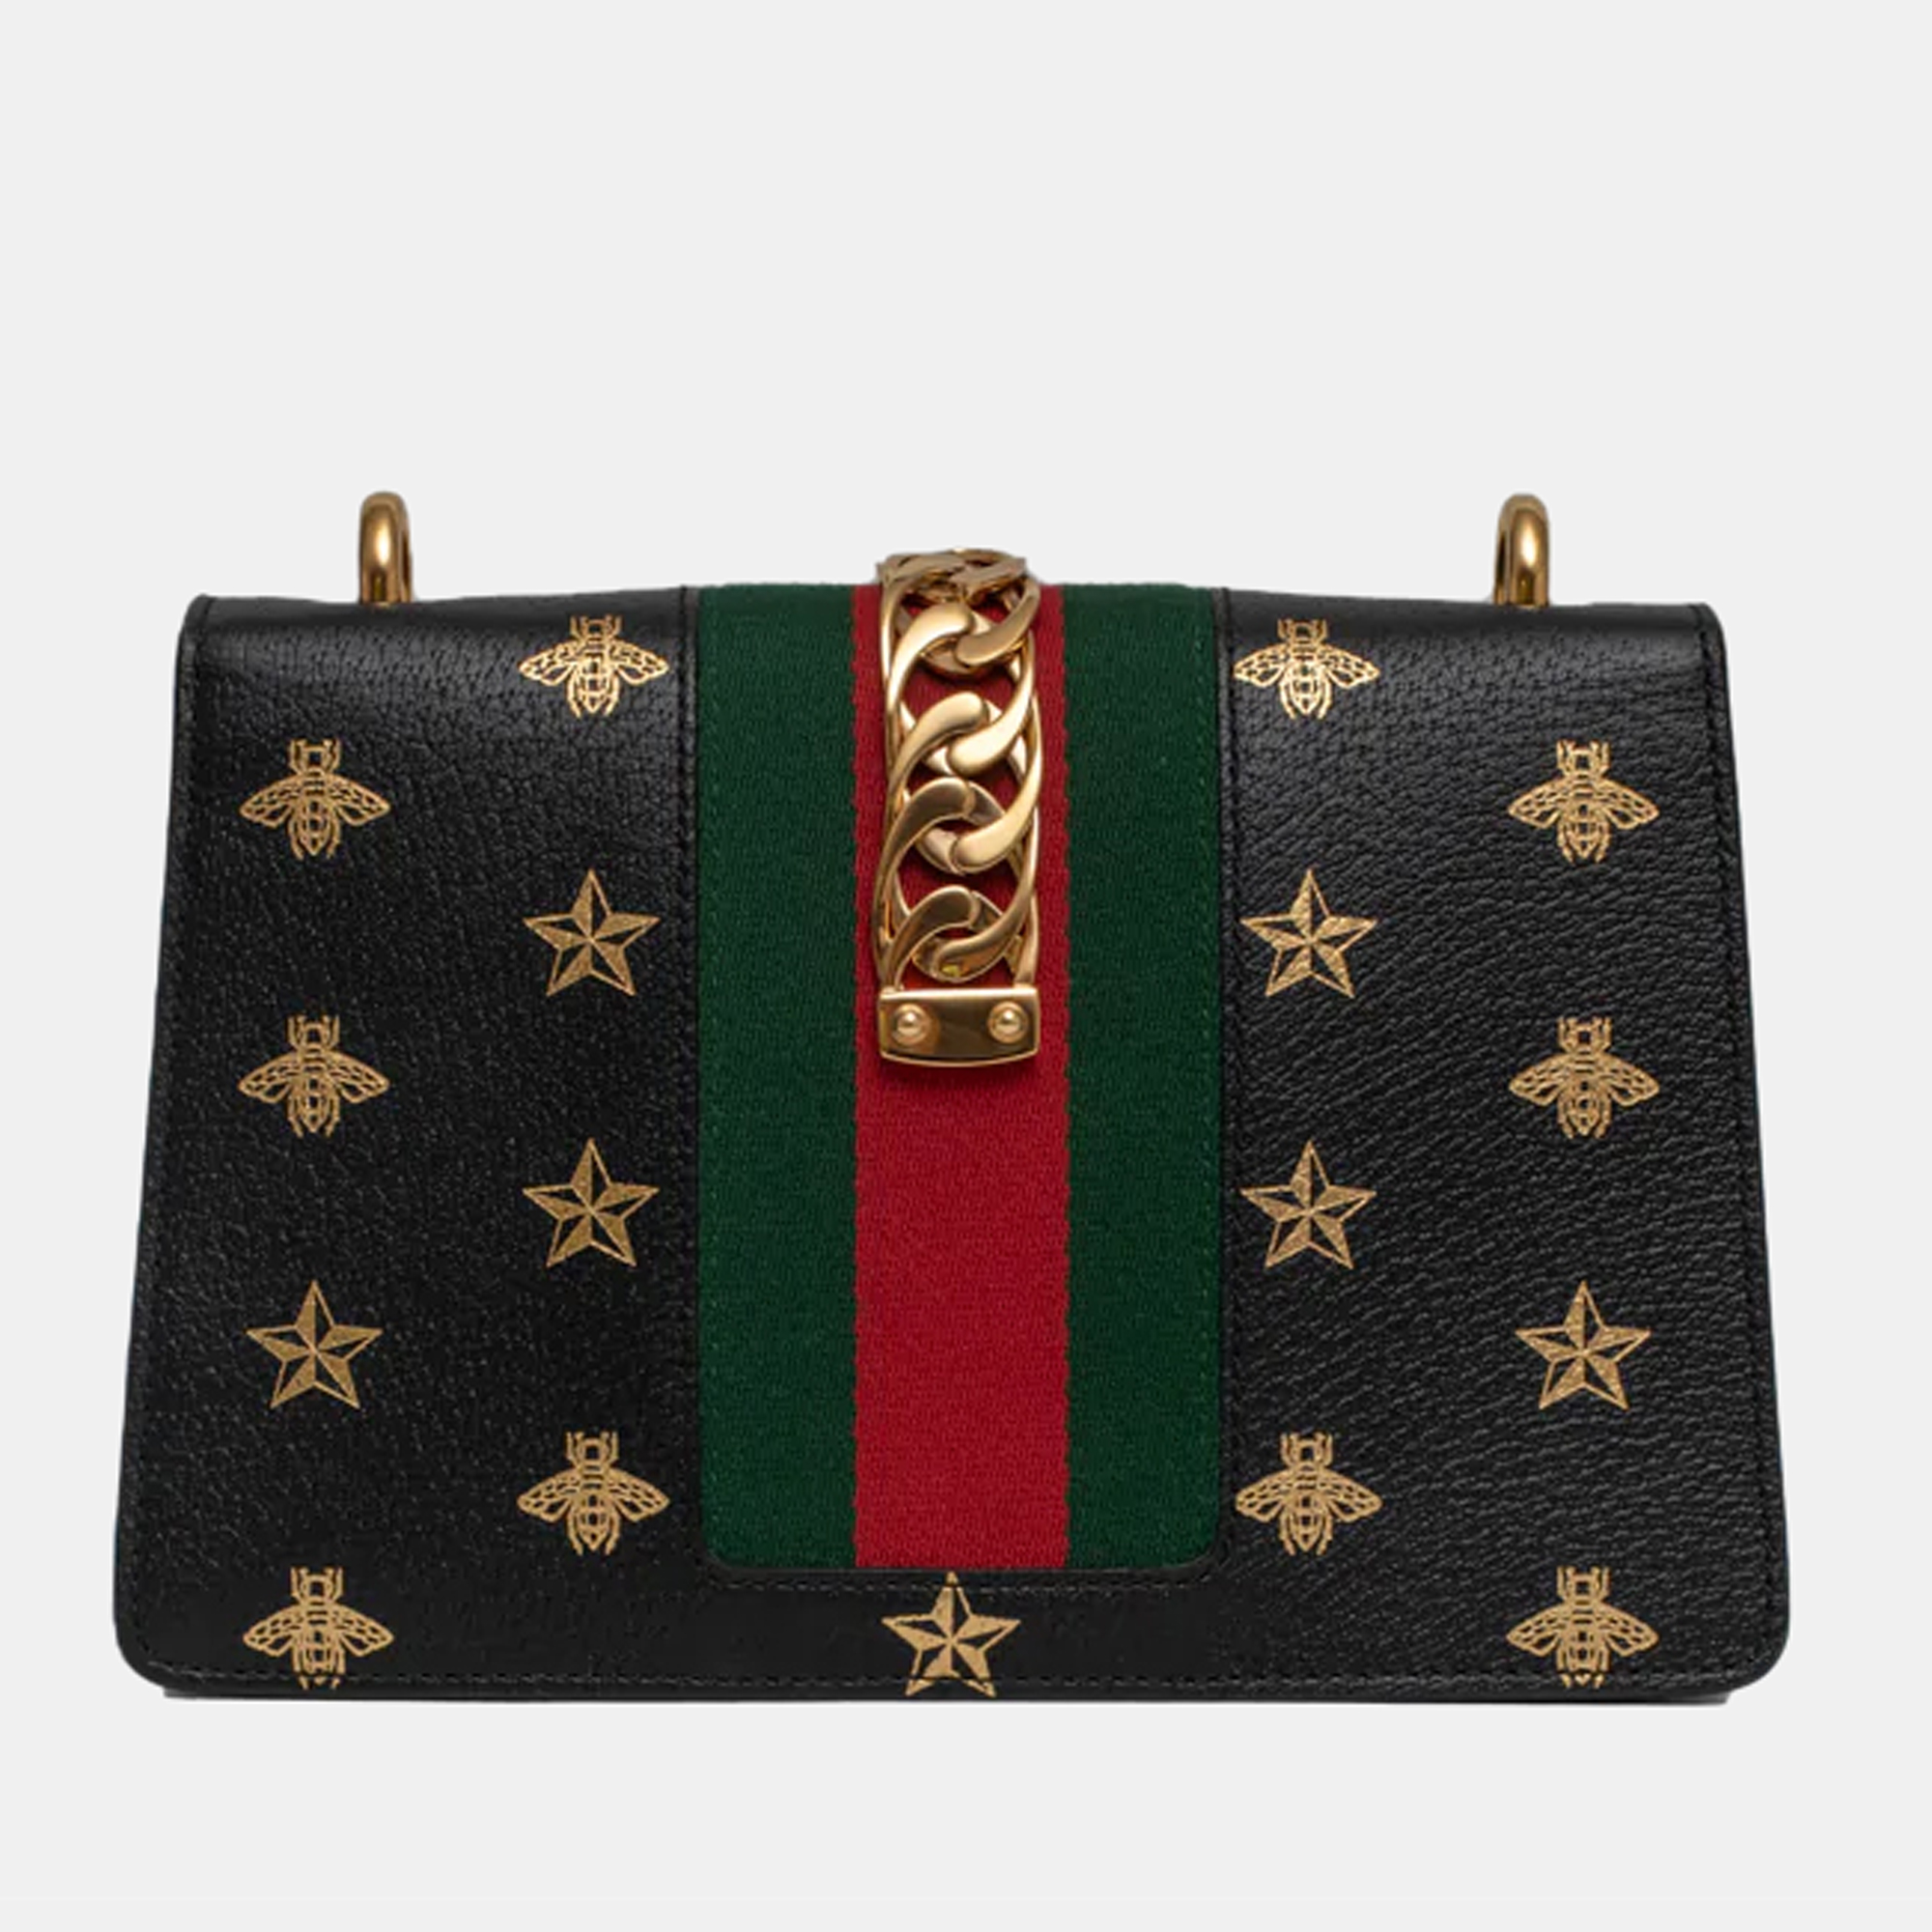 Gucci Black Bee Star Print Leather Small Sylvie Shoulder Bag